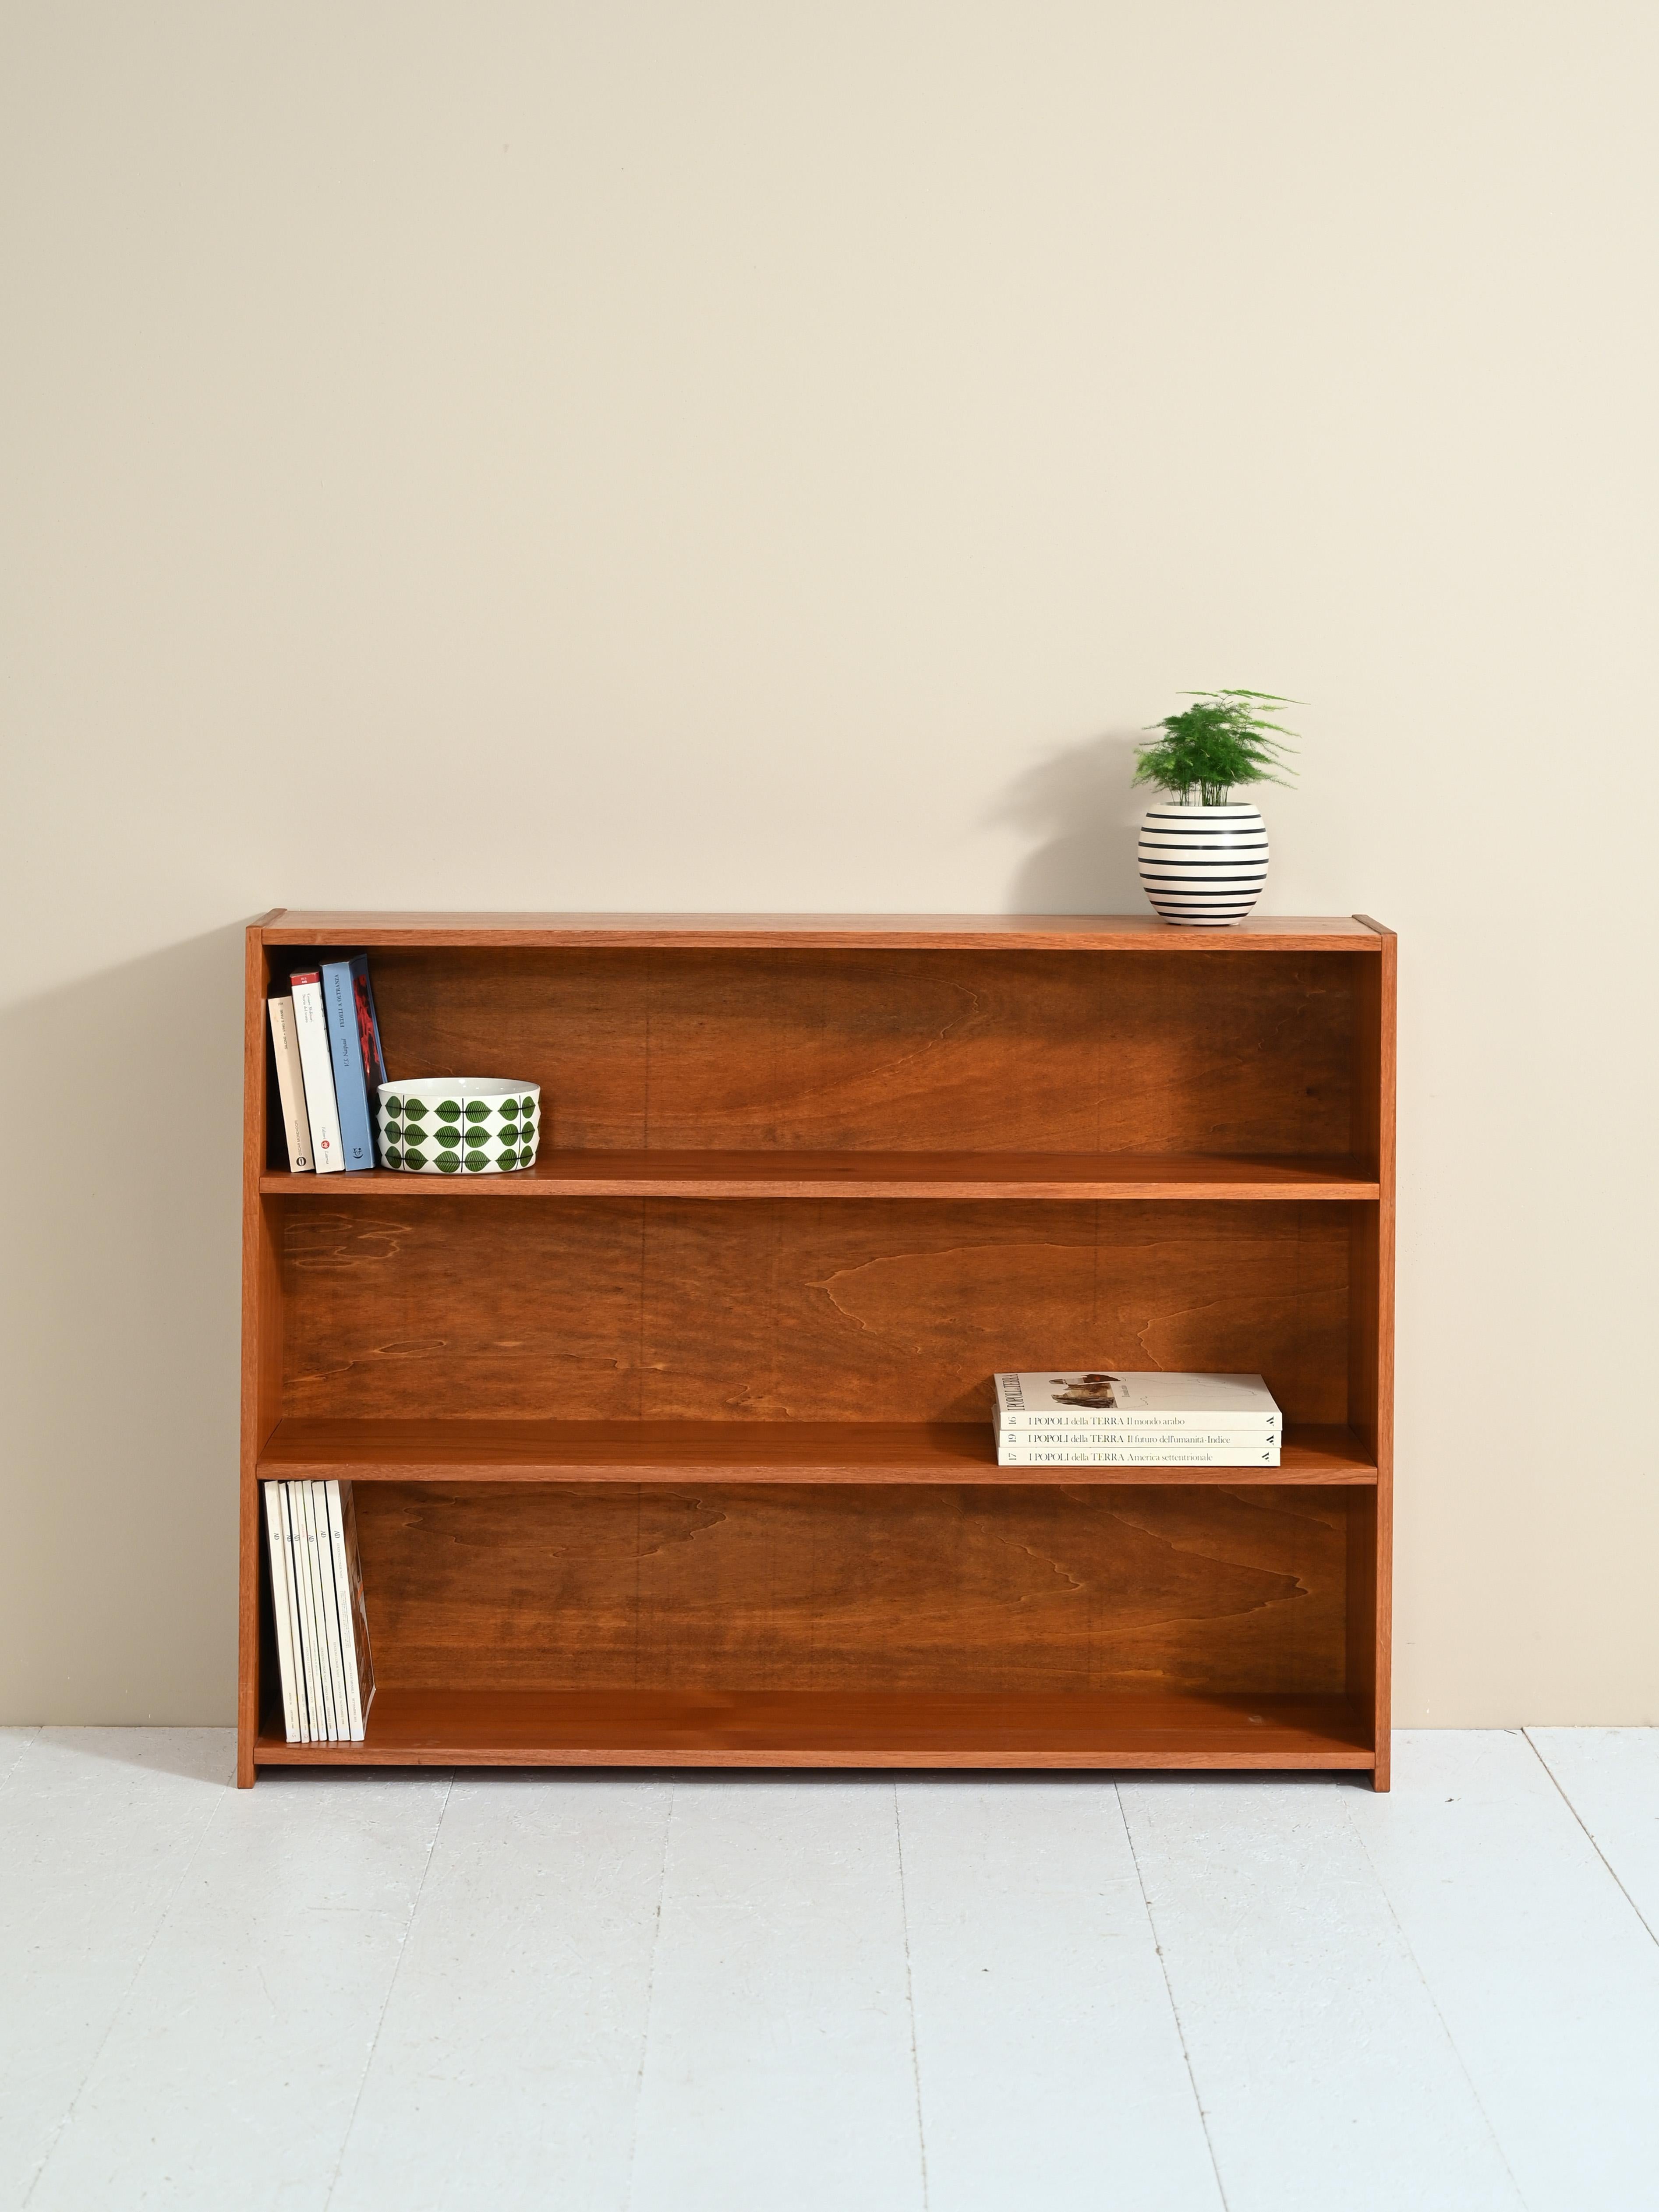 Vintage teak wood floor standing bookcase. 
The manufacture is Scandinavian; it was produced in the 1960s.
It consists of four shelves, two of which have adjustable heights. 

Featuring a minimalist design, this Scandinavian 1960s furniture is